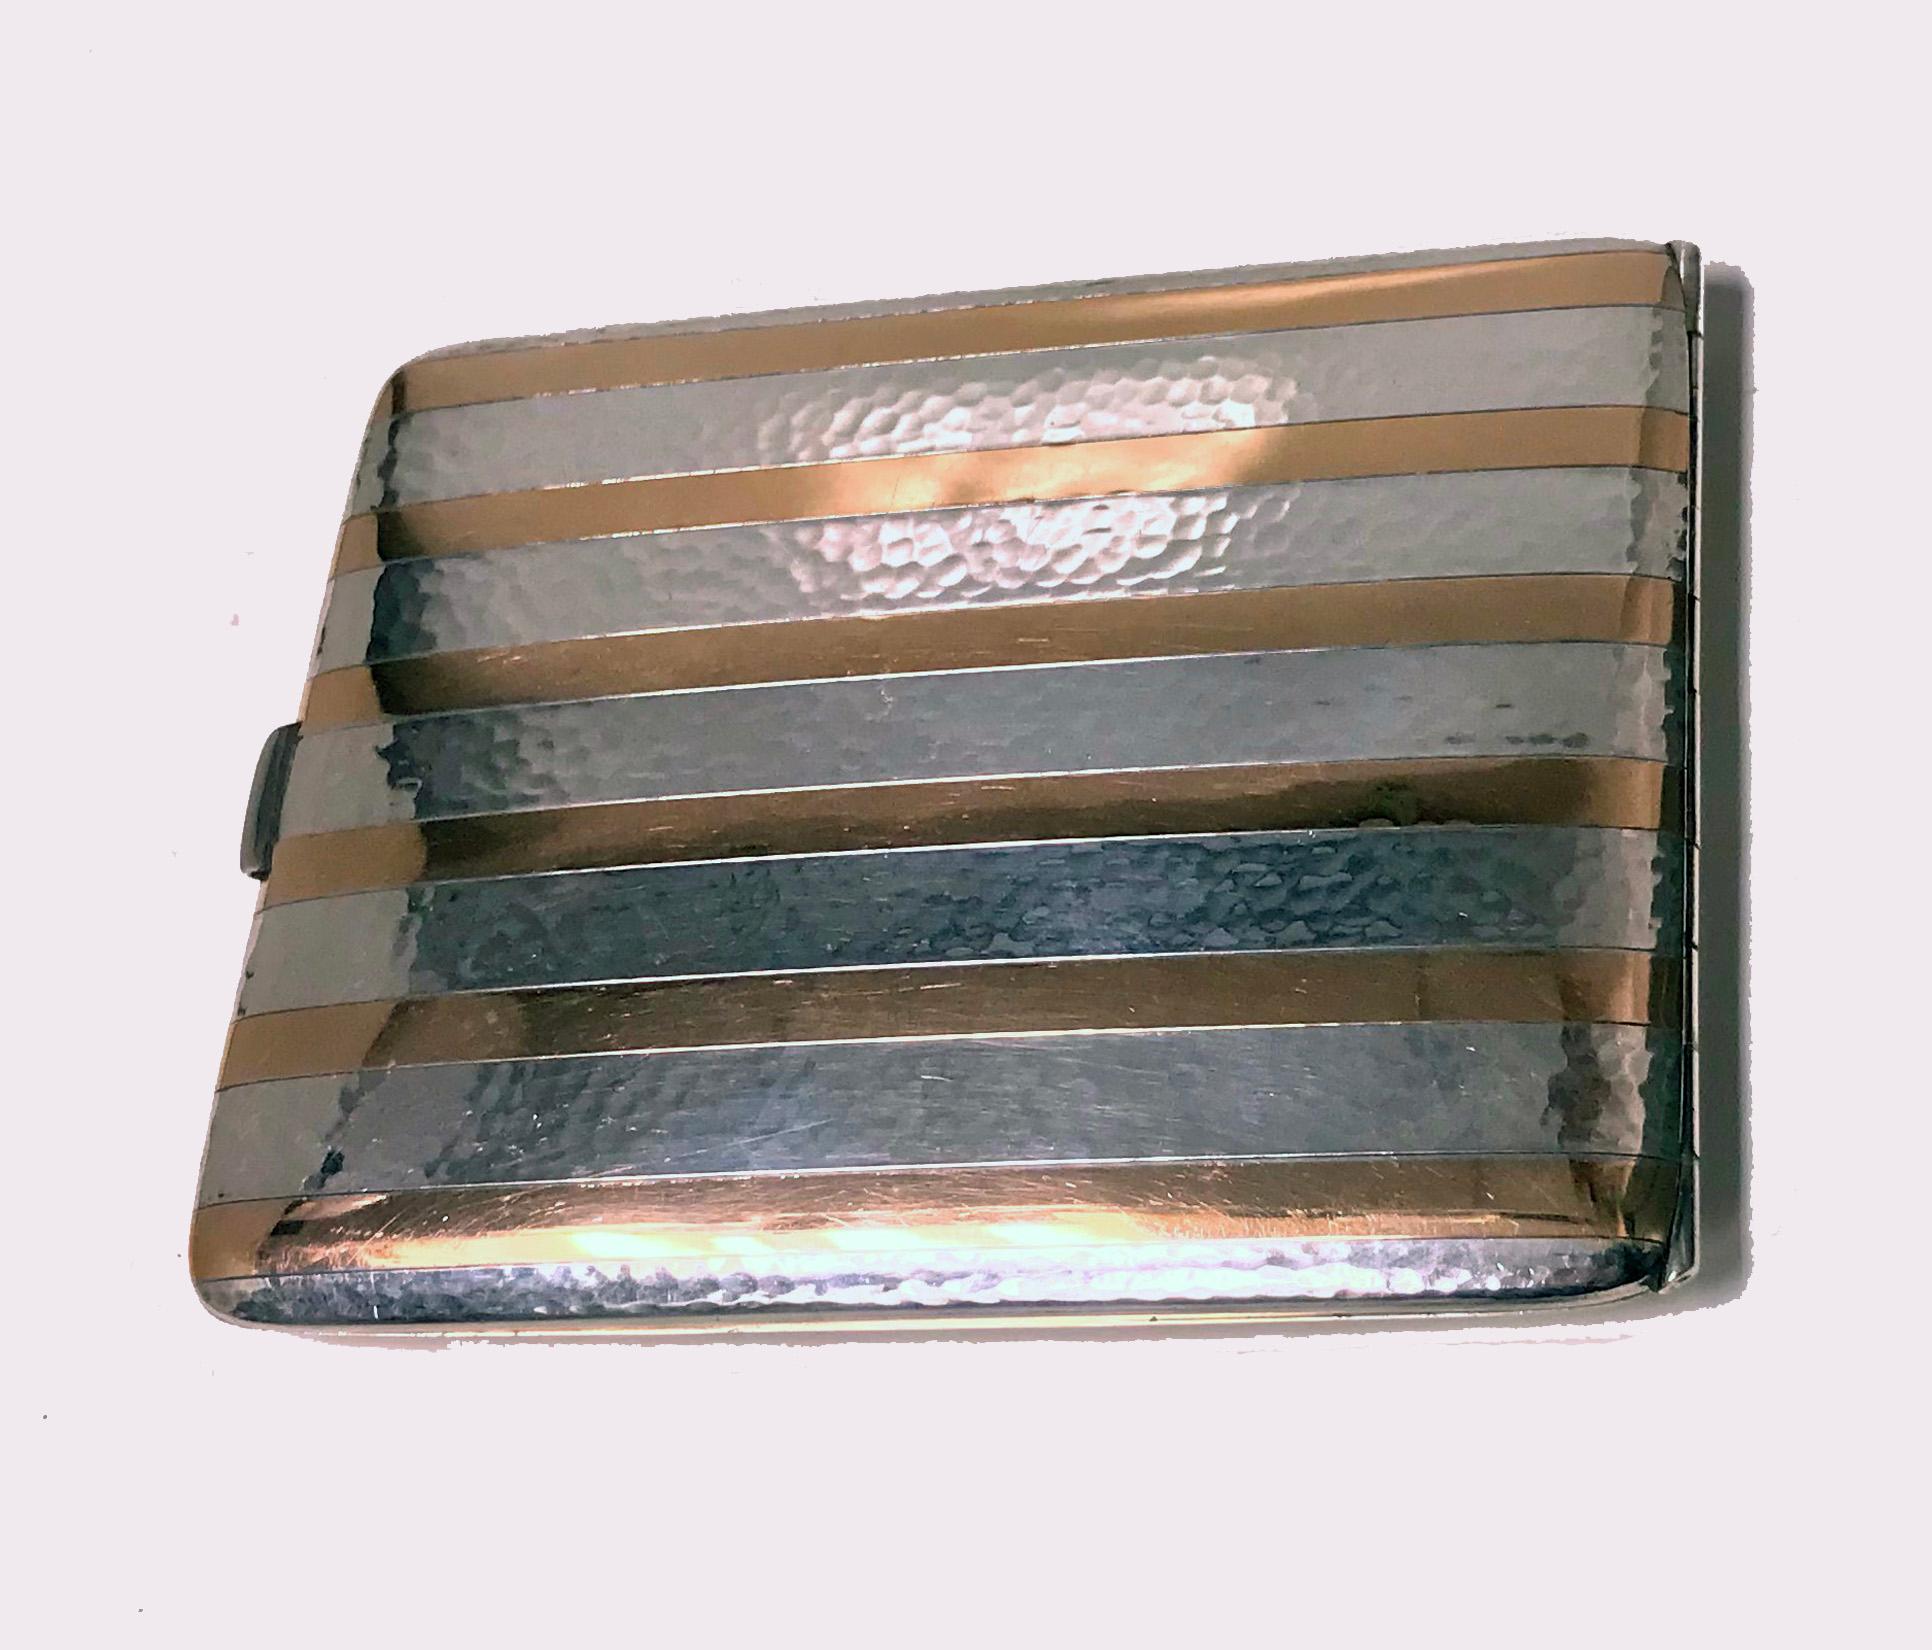 American Art Deco 14-karat and sterling silver cigarette case, Watrous Mfg Silver Co mark for CW Wallingford, CT and numbered 168. Rectangular slightly concave form hammered panels of sterling interspace with 14-karat pink gold inlaid bands.